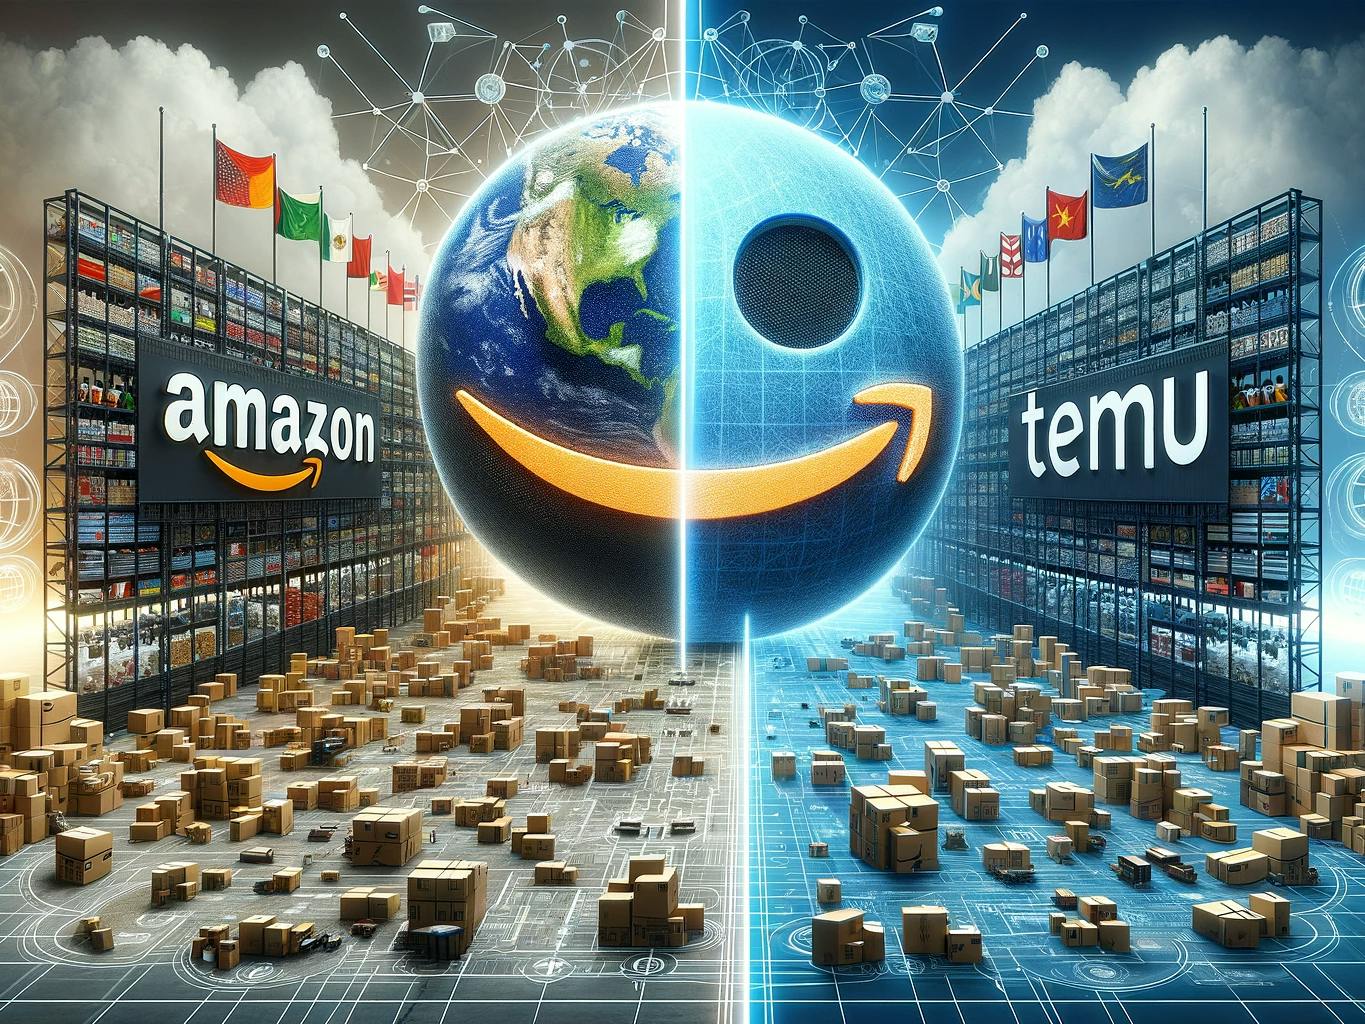 a comparison between Amazon and Temu, showcasing the contrasts between these two online shopping giants in terms of their brand recognition, global presence, and operational focus.